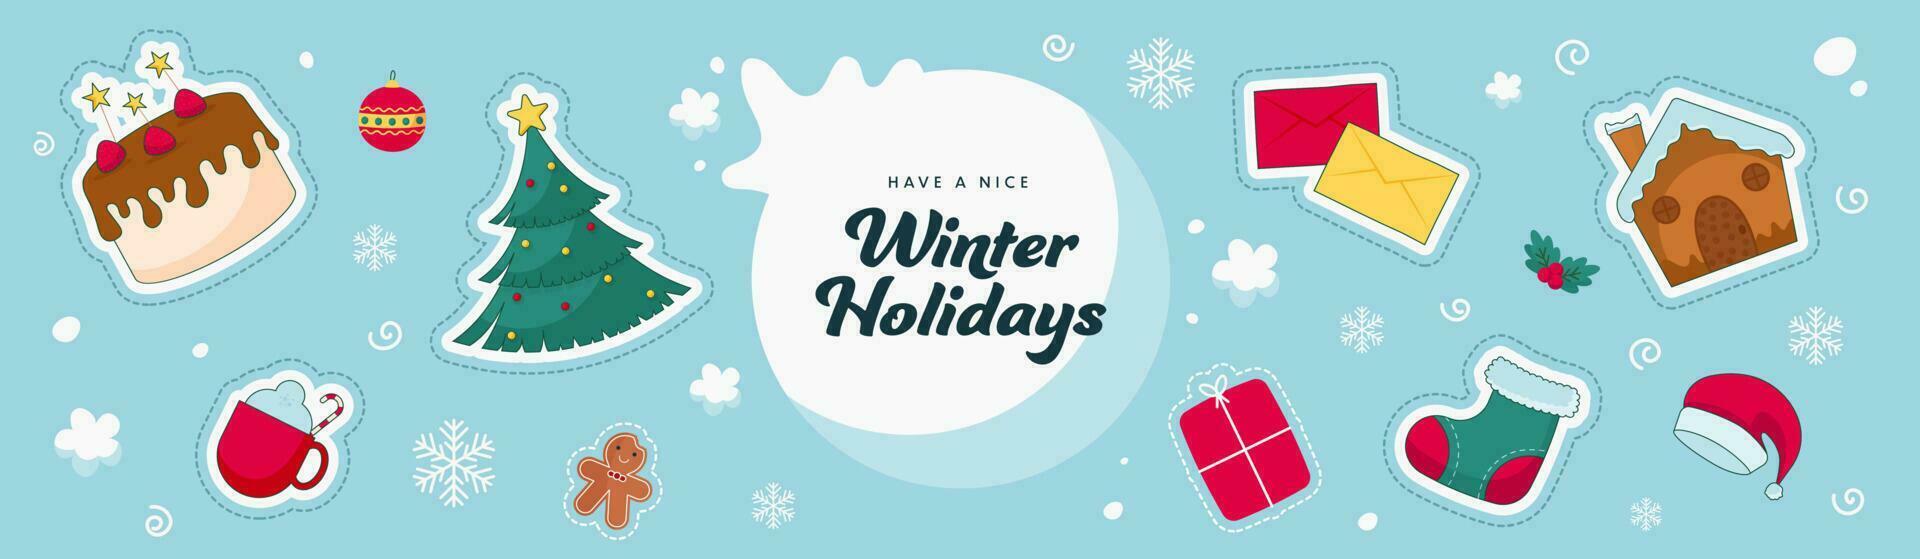 Winter Holidays Banner Or Header Design With Sticker Style Christmas Elements Decorated On Blue Background. vector